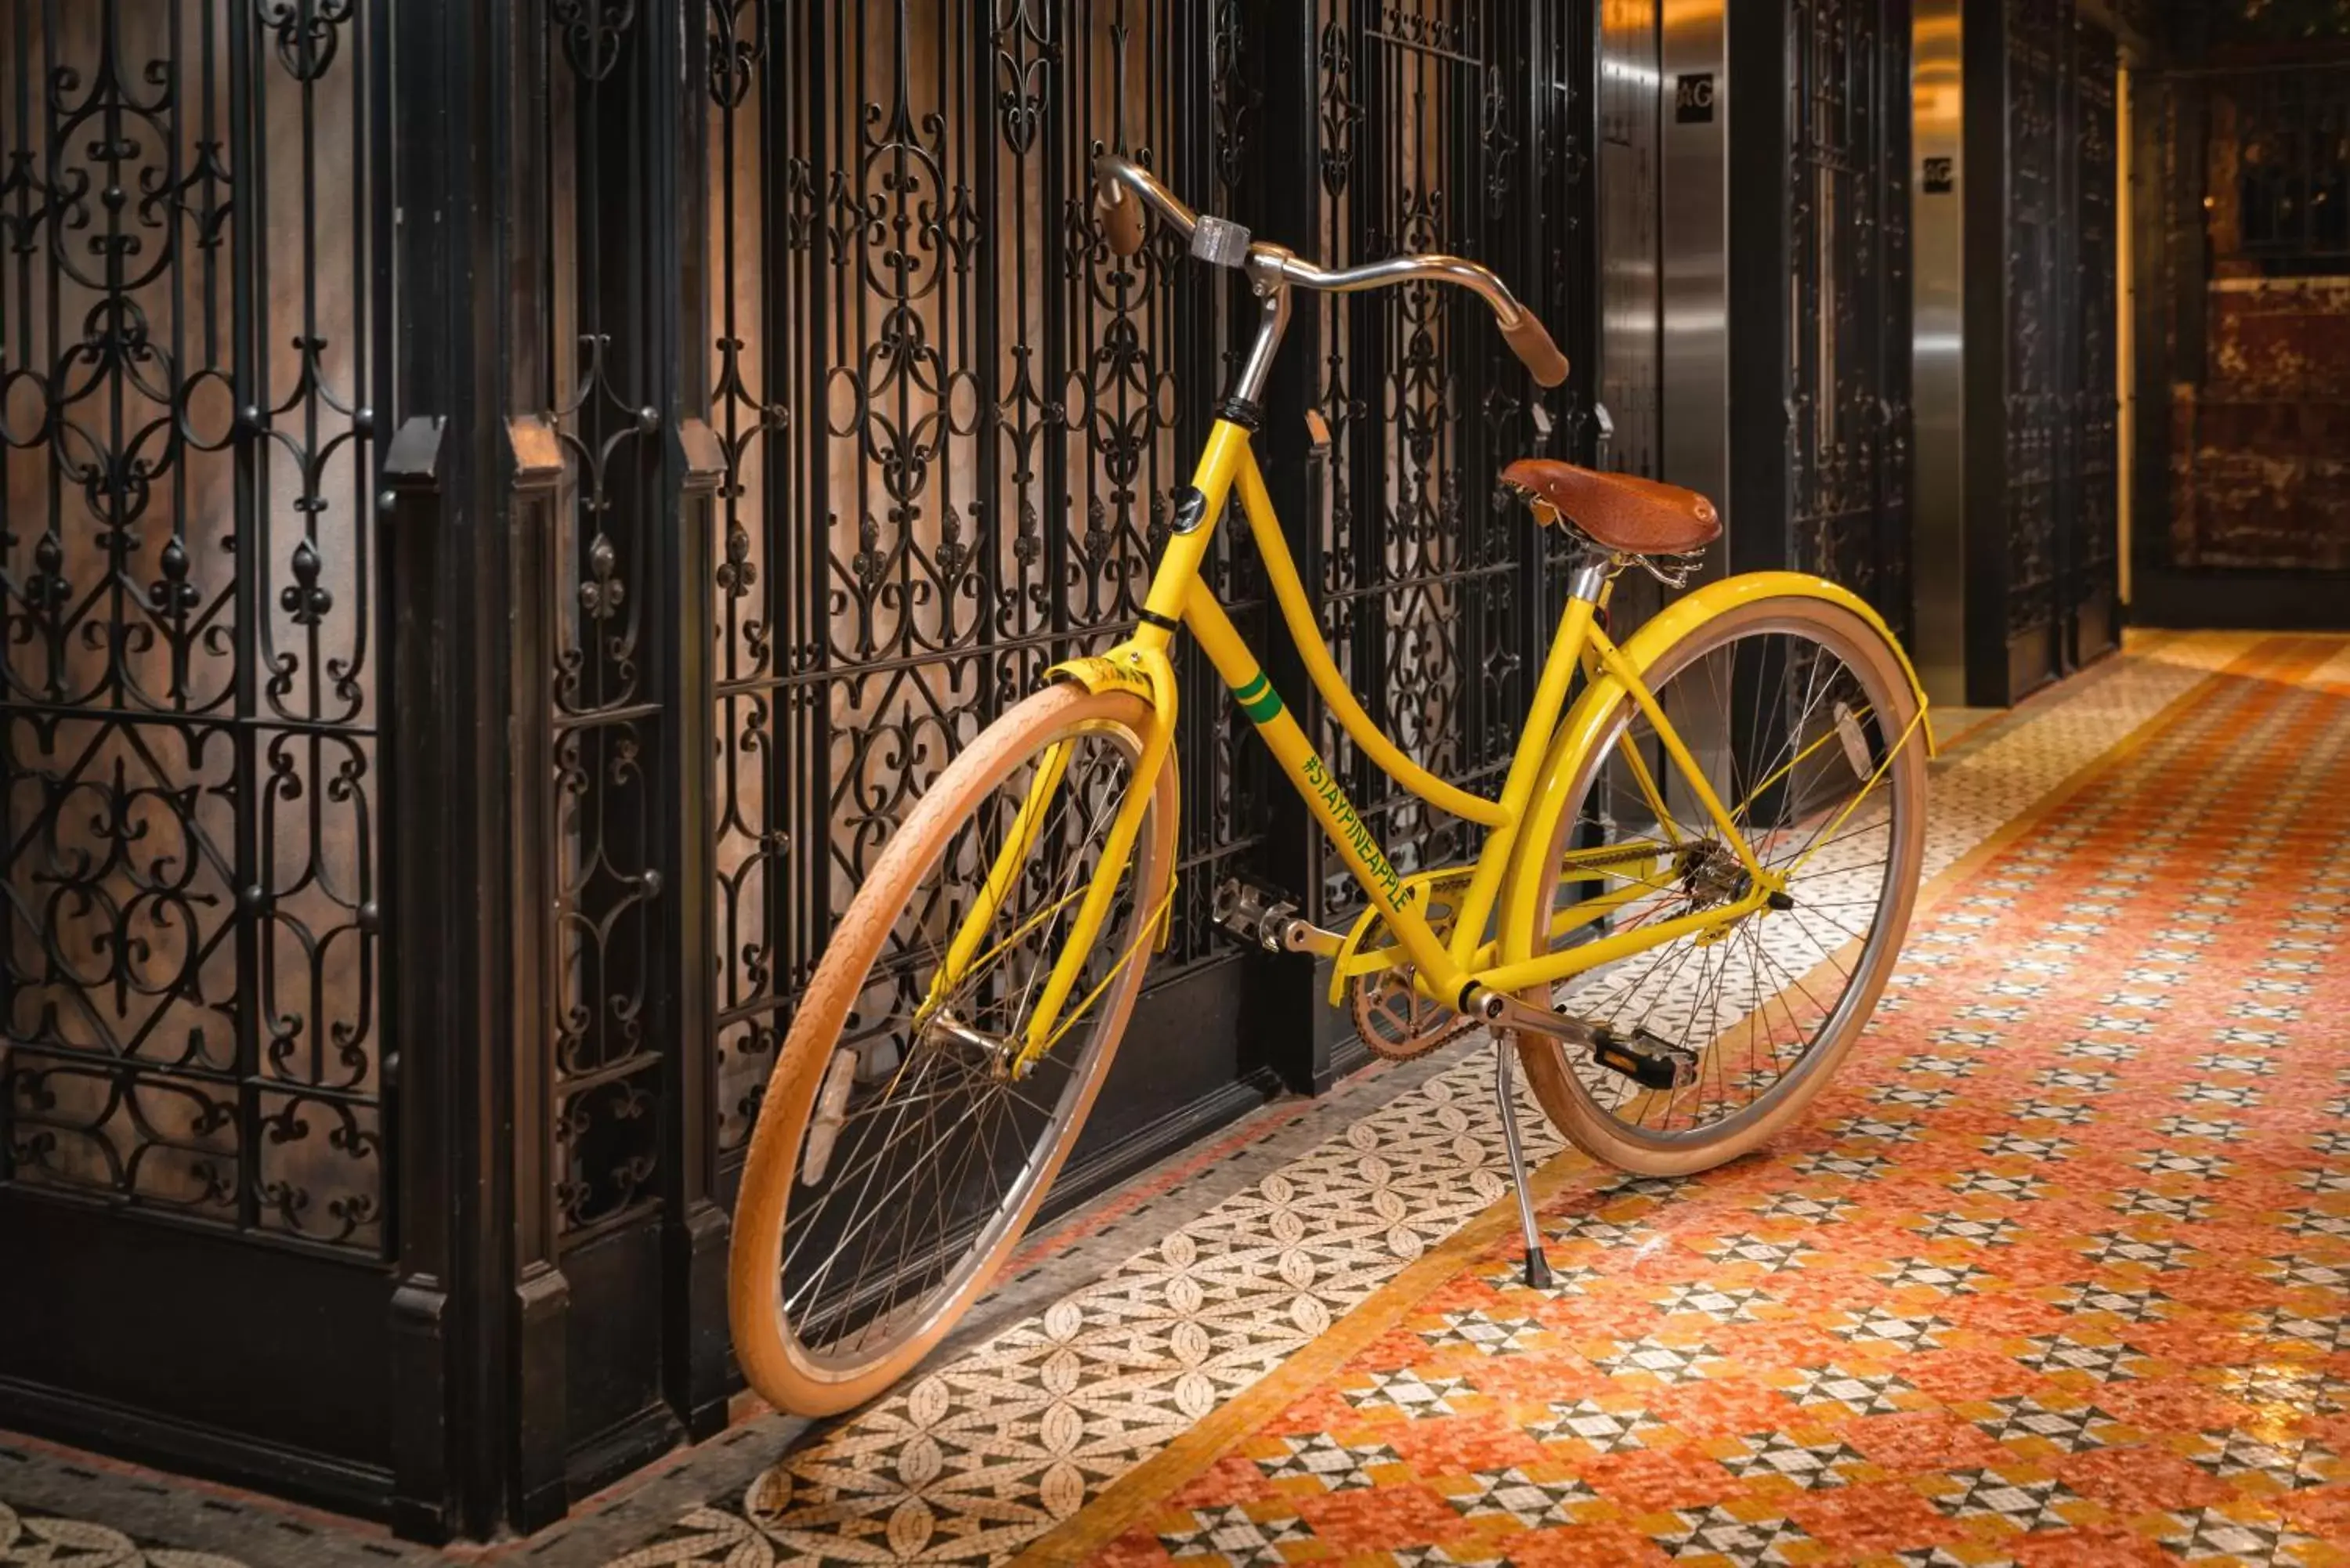 Cycling, Other Activities in Staypineapple, An Iconic Hotel, The Loop